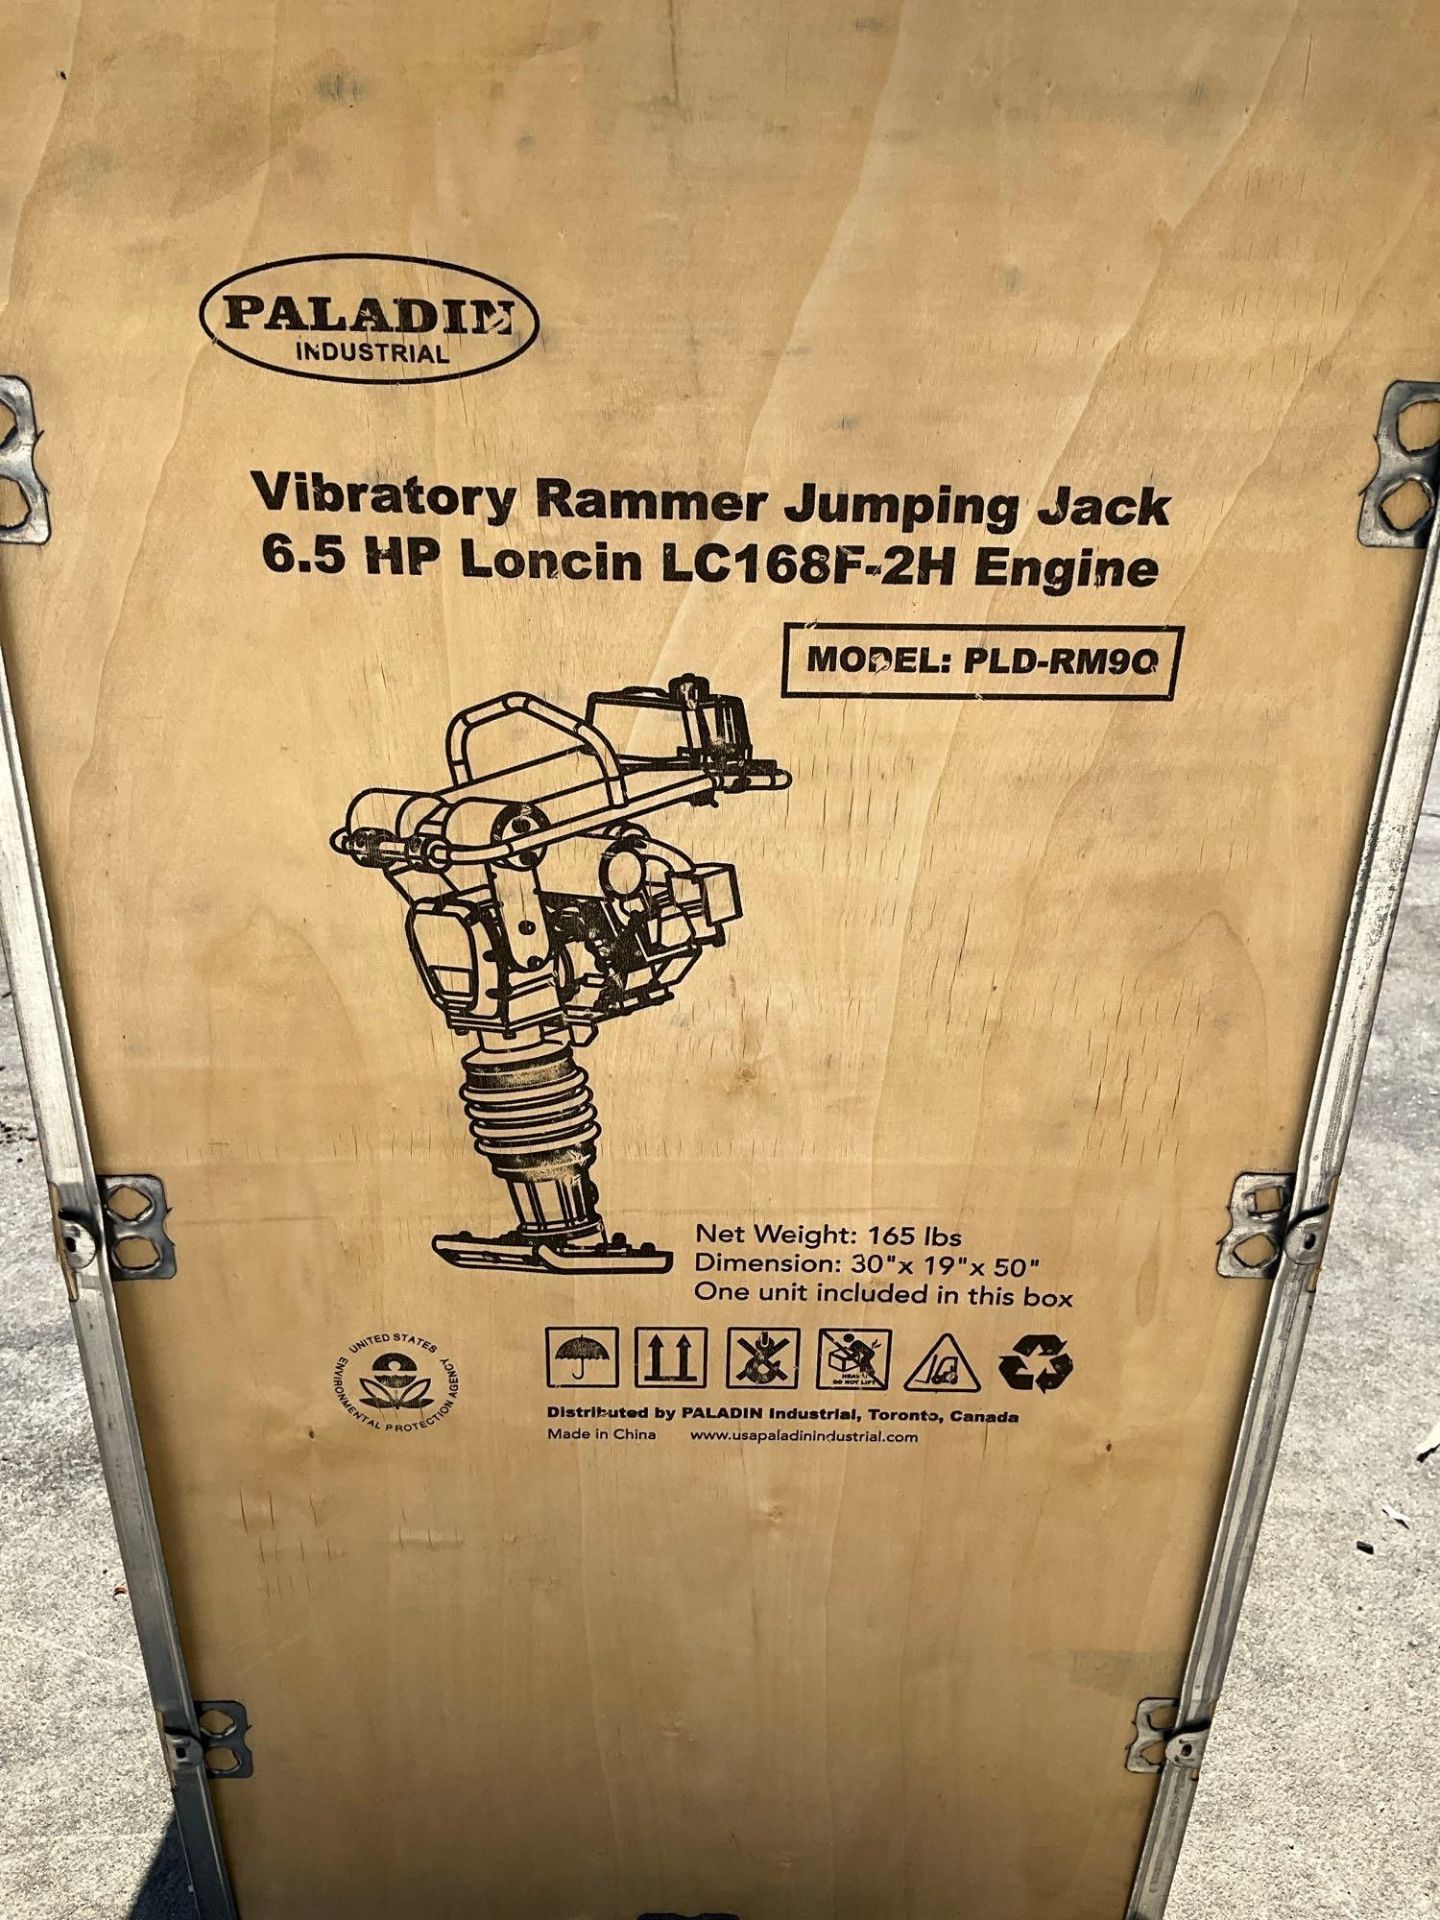 UNUSED PALADIN INDUSTRIAL RAMMER JUMPING JACK MODEL PLD-RM90, GAS POWERED - Image 6 of 7